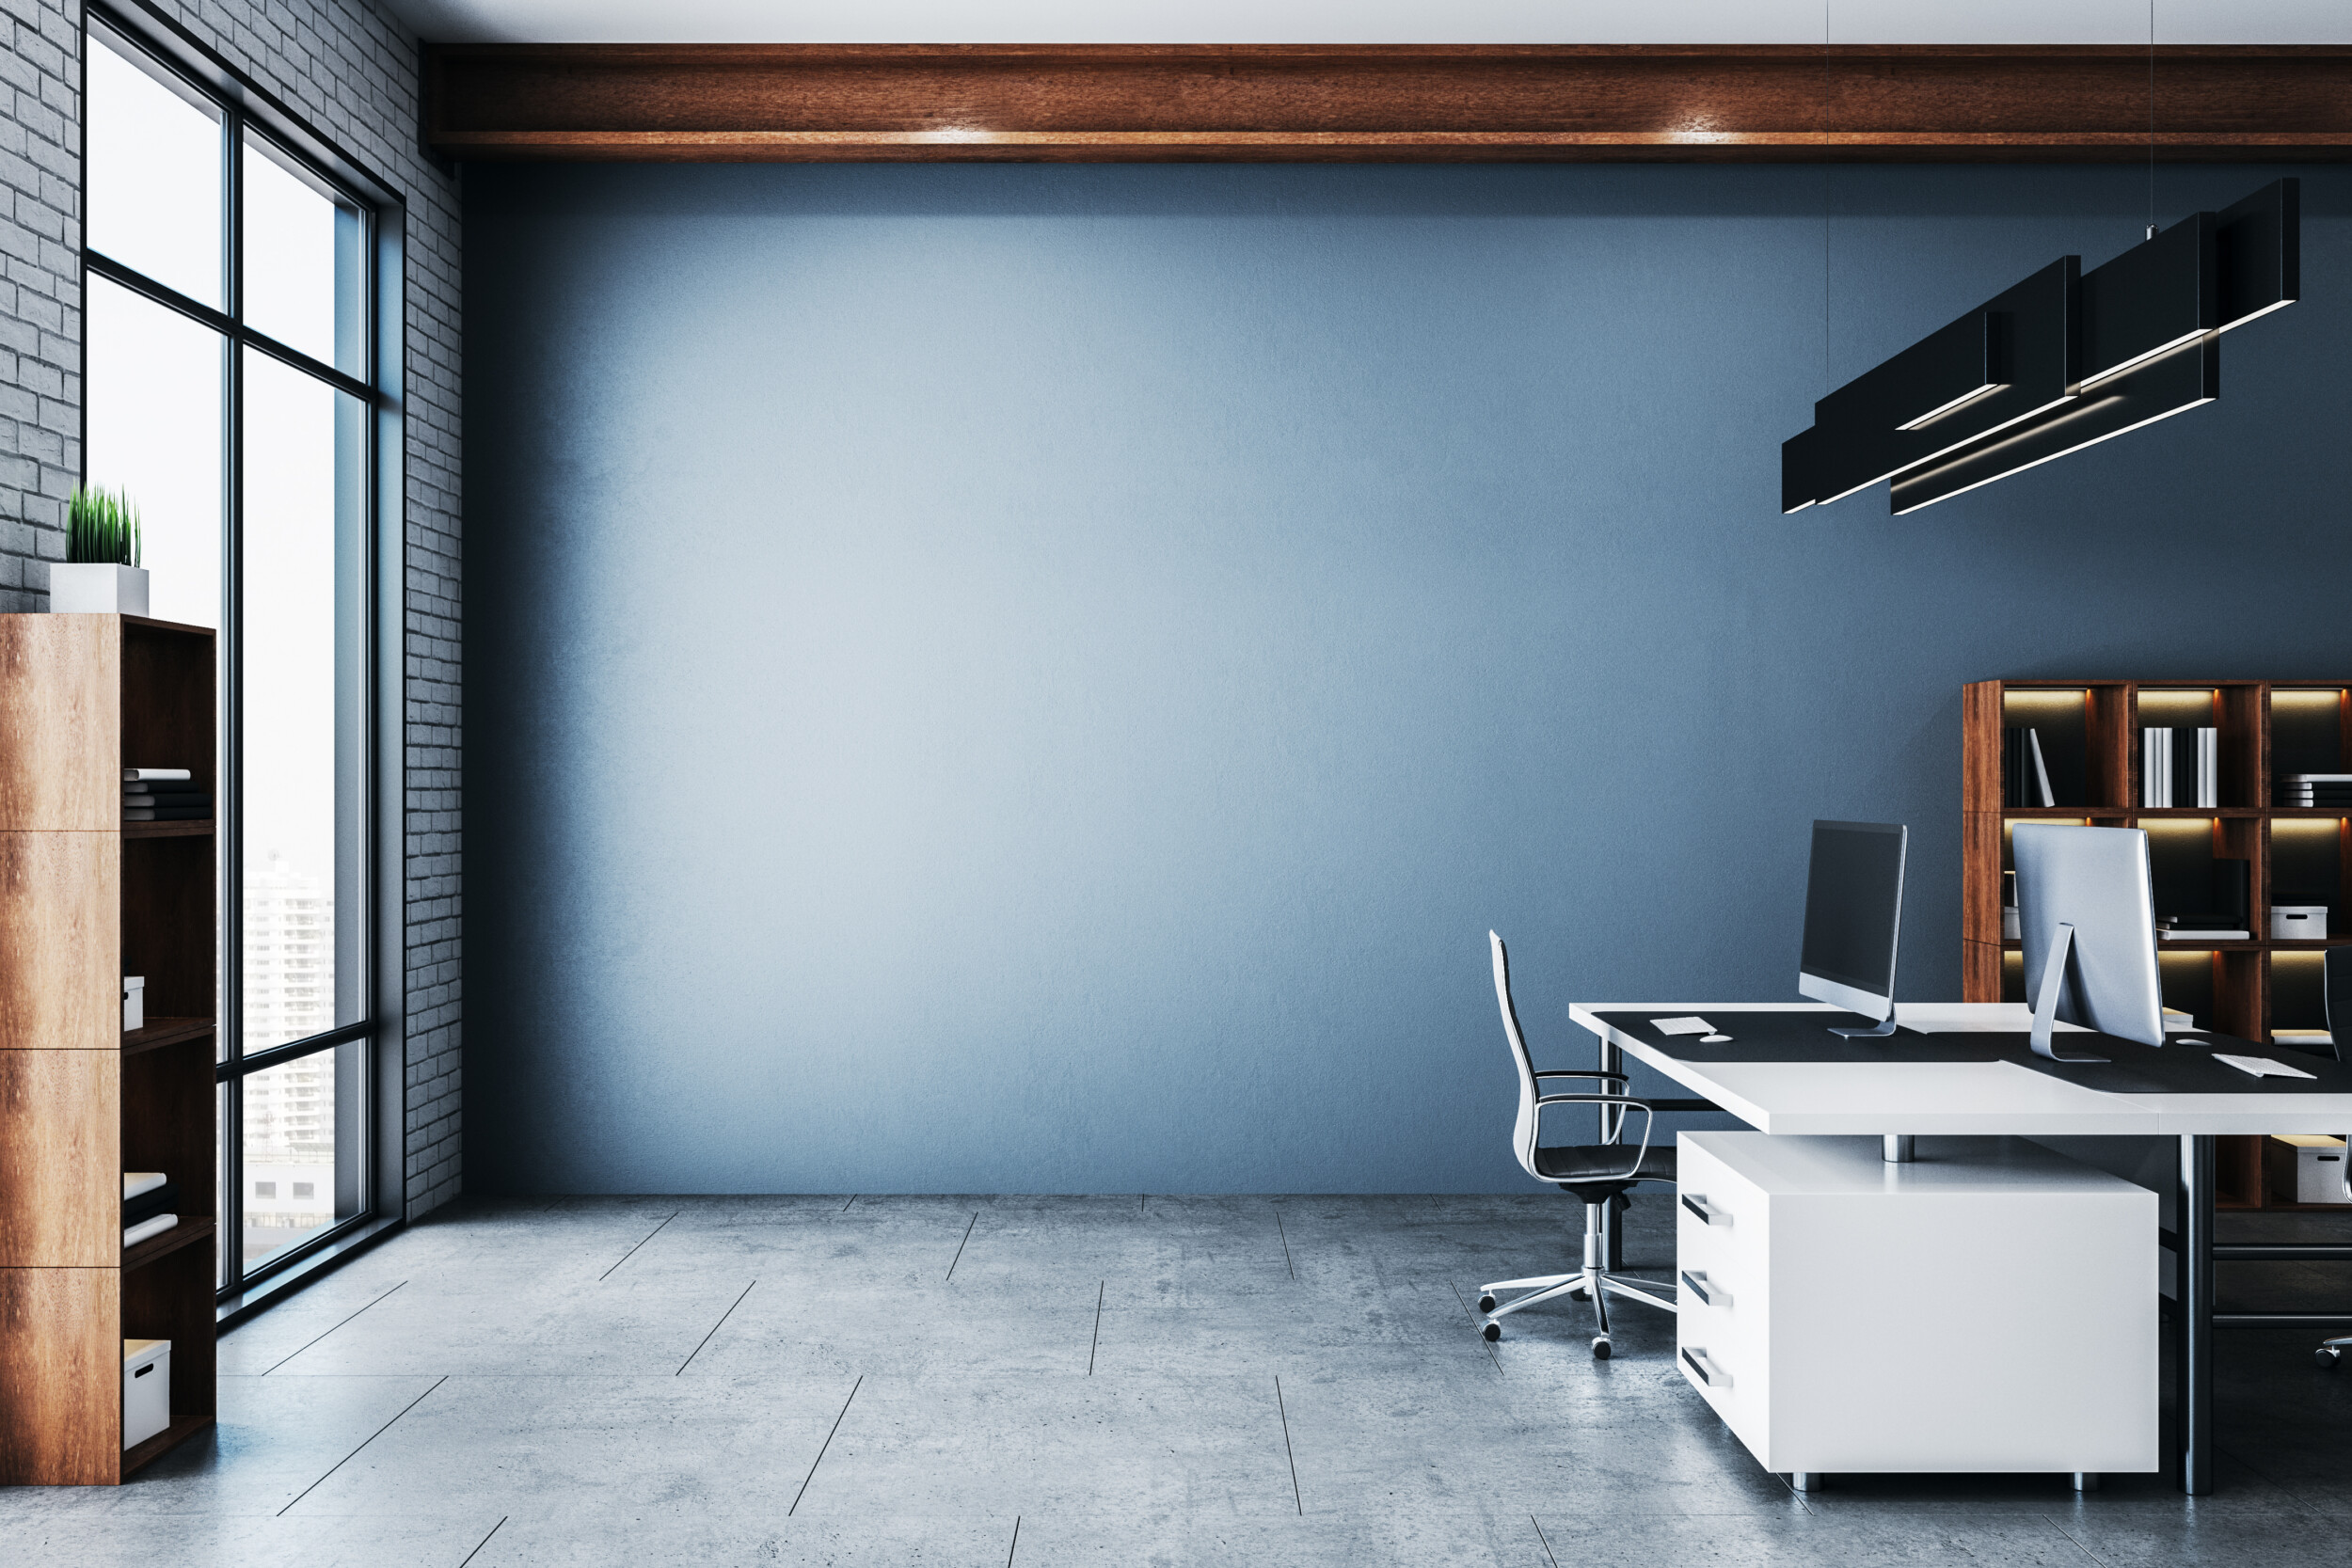 https://www.decoraid.com/wp-content/uploads/2022/01/office-interior-with-blank-blue-wall-2500x1667.jpeg